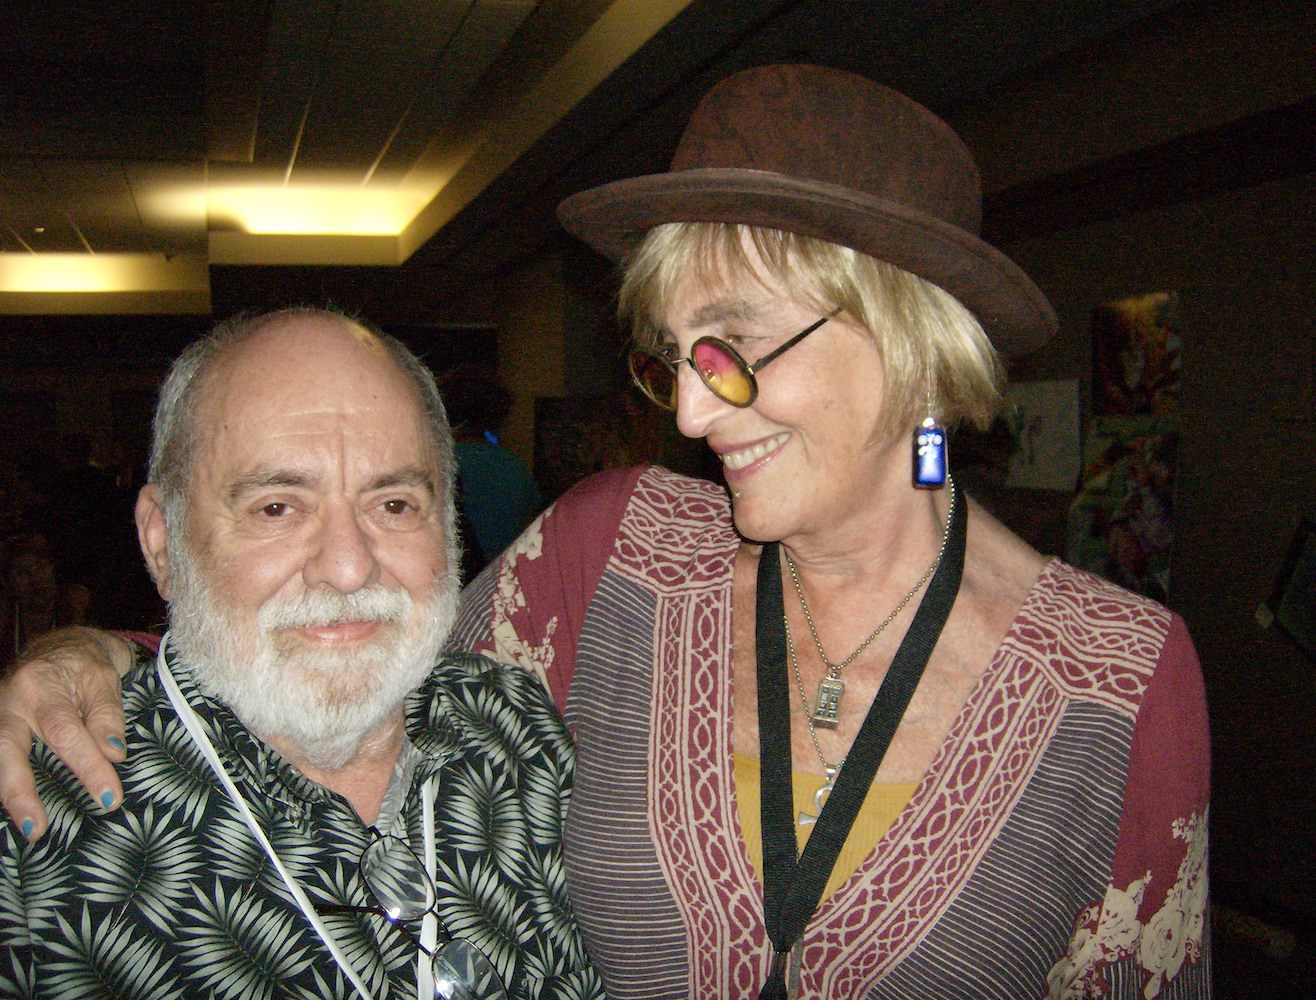 Jude Patton and Kate Bornstein at the Gender Odyssey conference. Photo courtesy of Jude Patton.